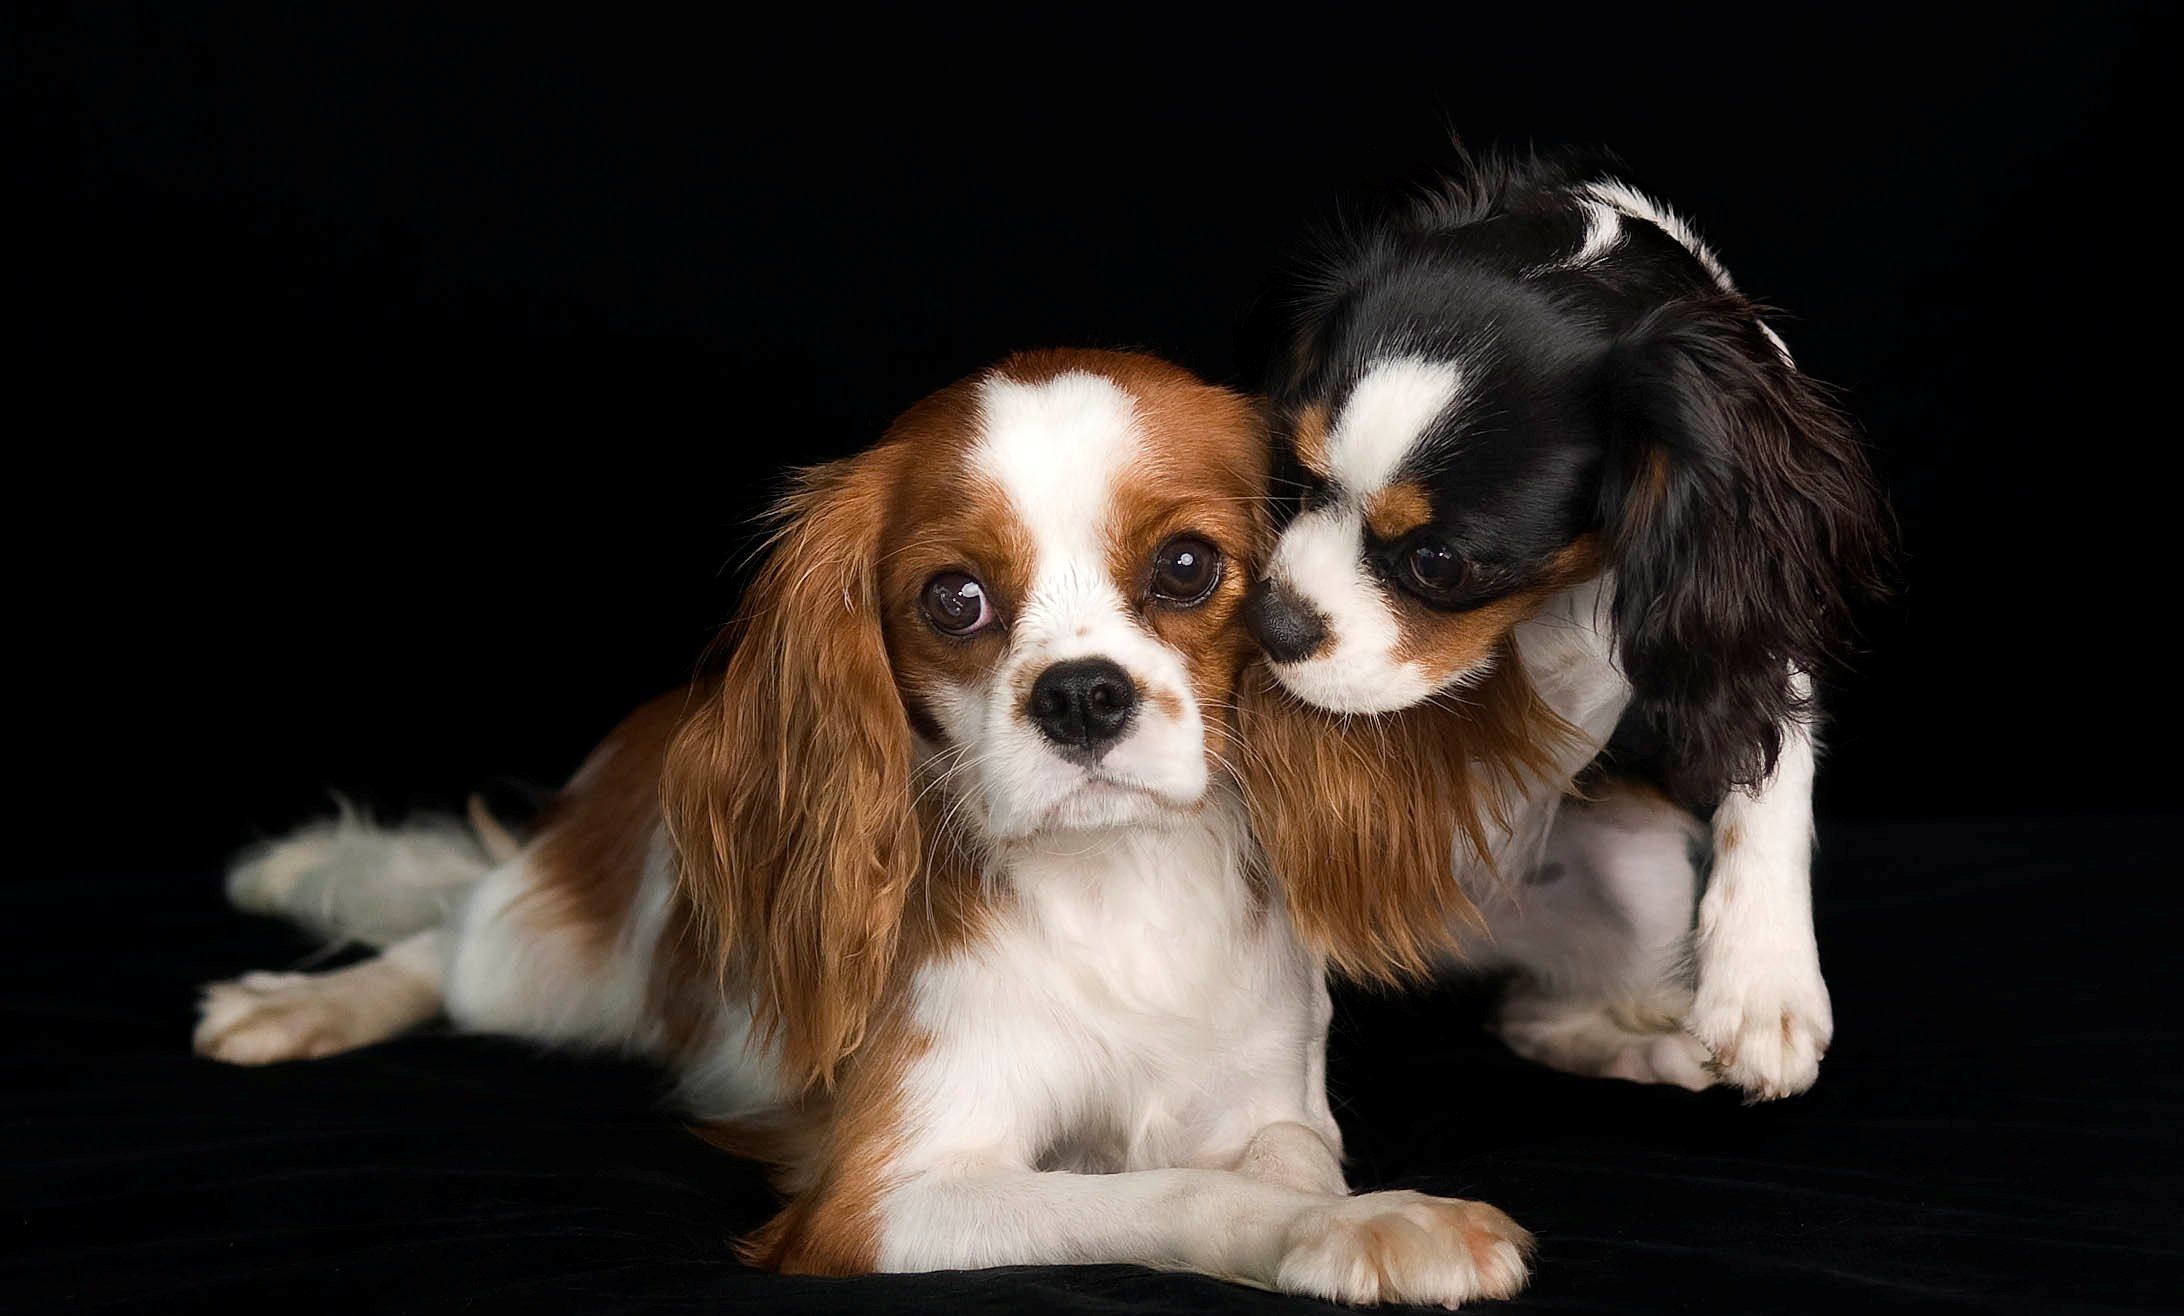 Lovely Cavalier King Charles Spaniel dogs photo and wallpaper ...